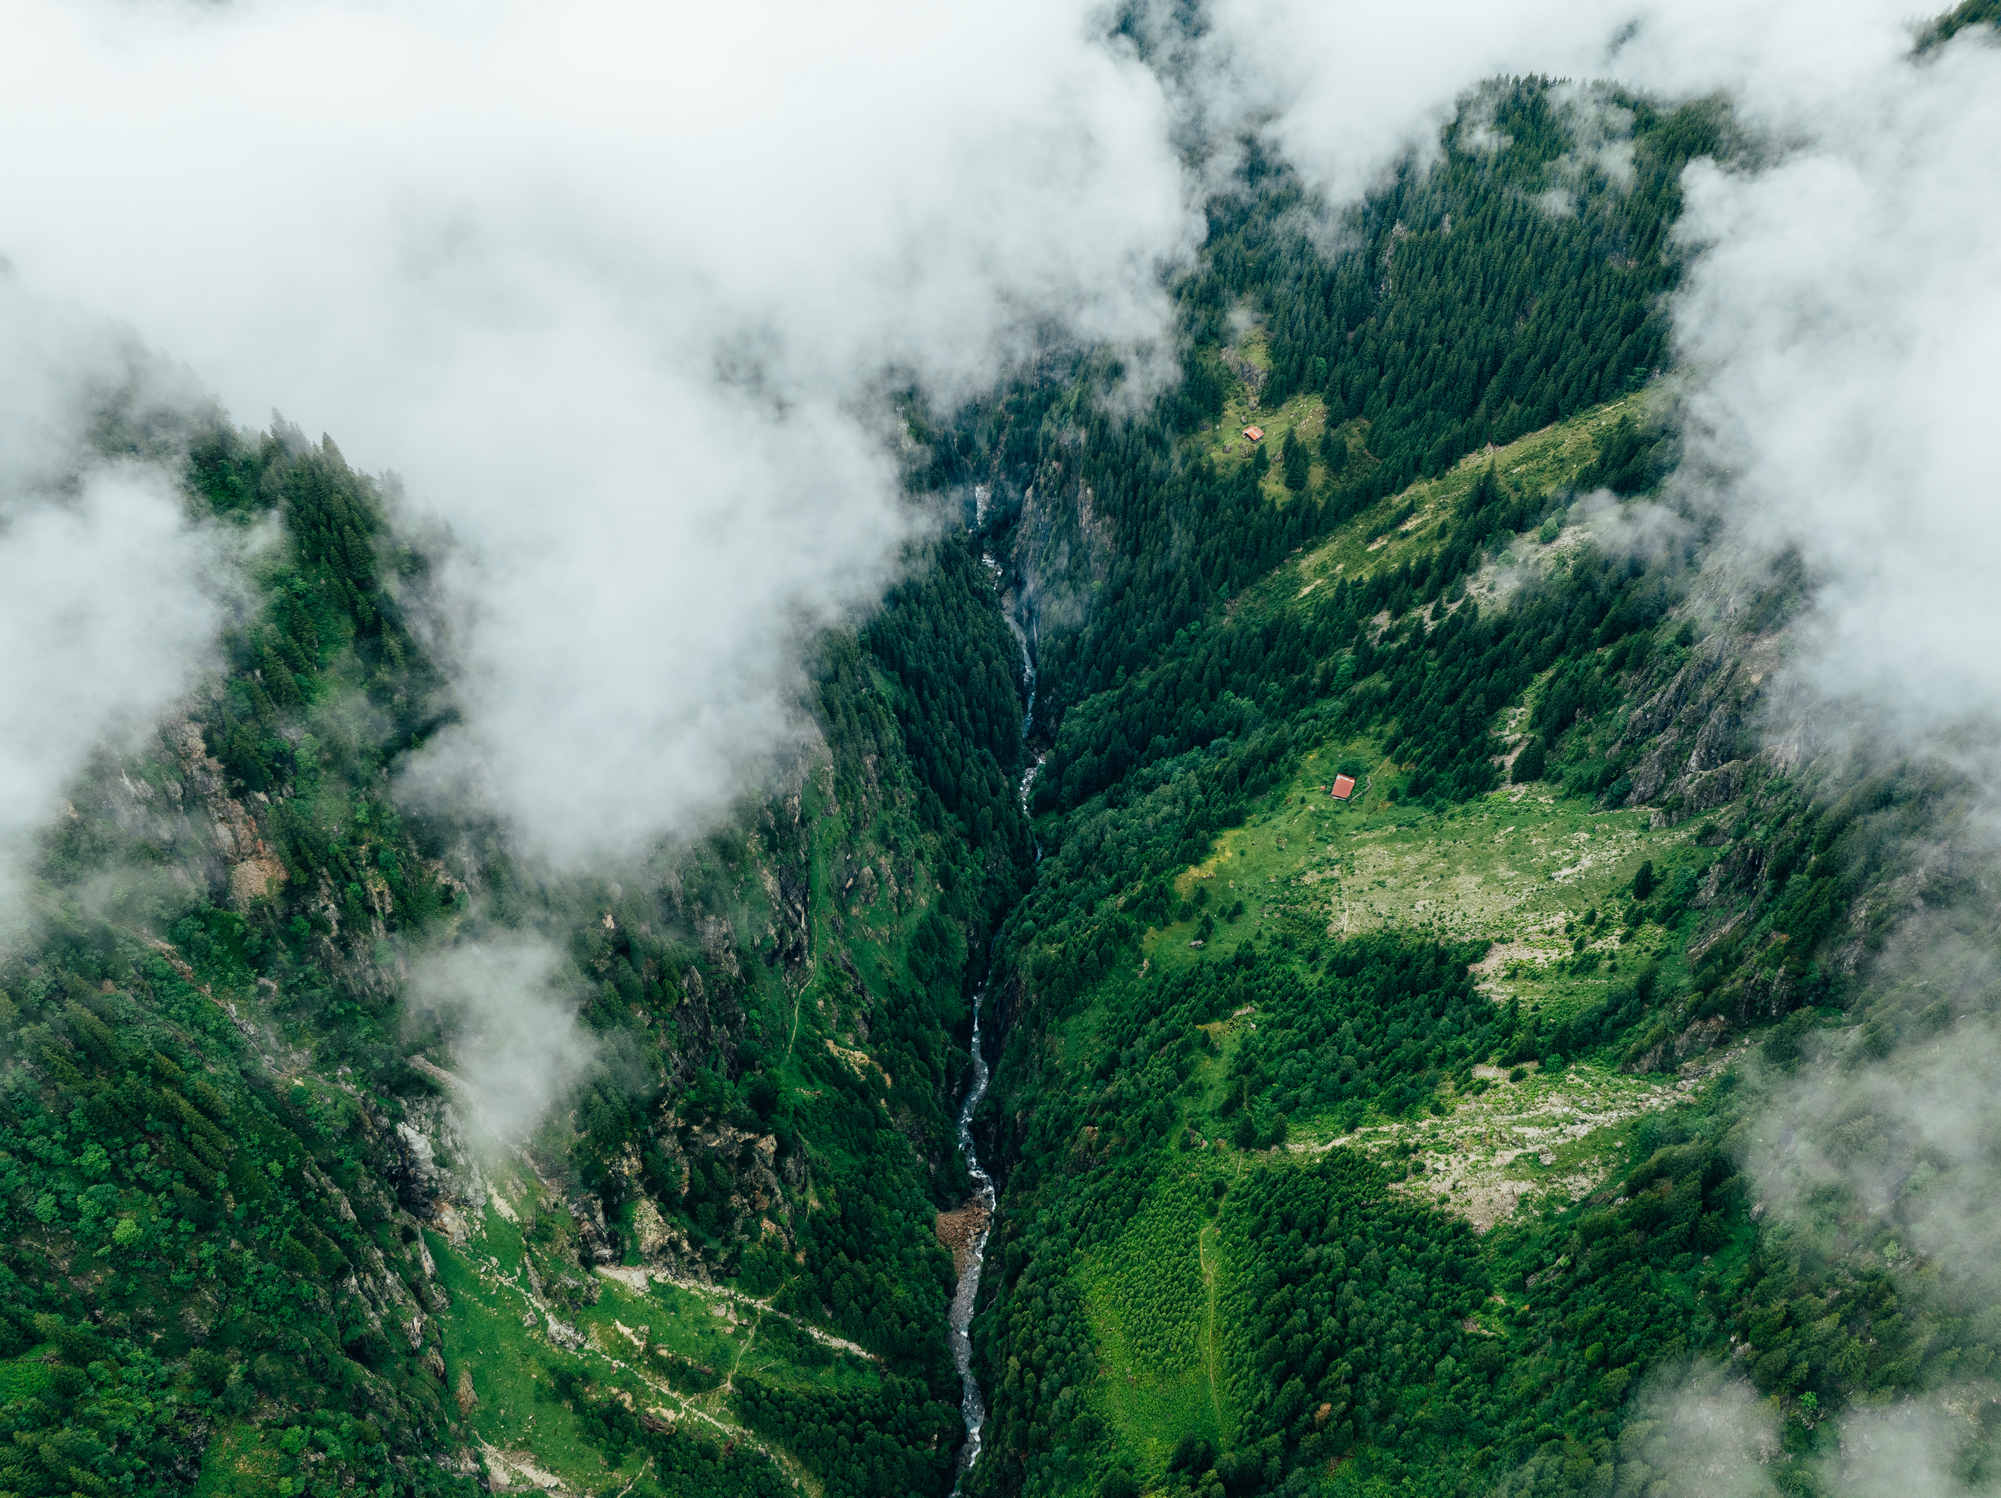 Switzerland stream in the fog from a drone